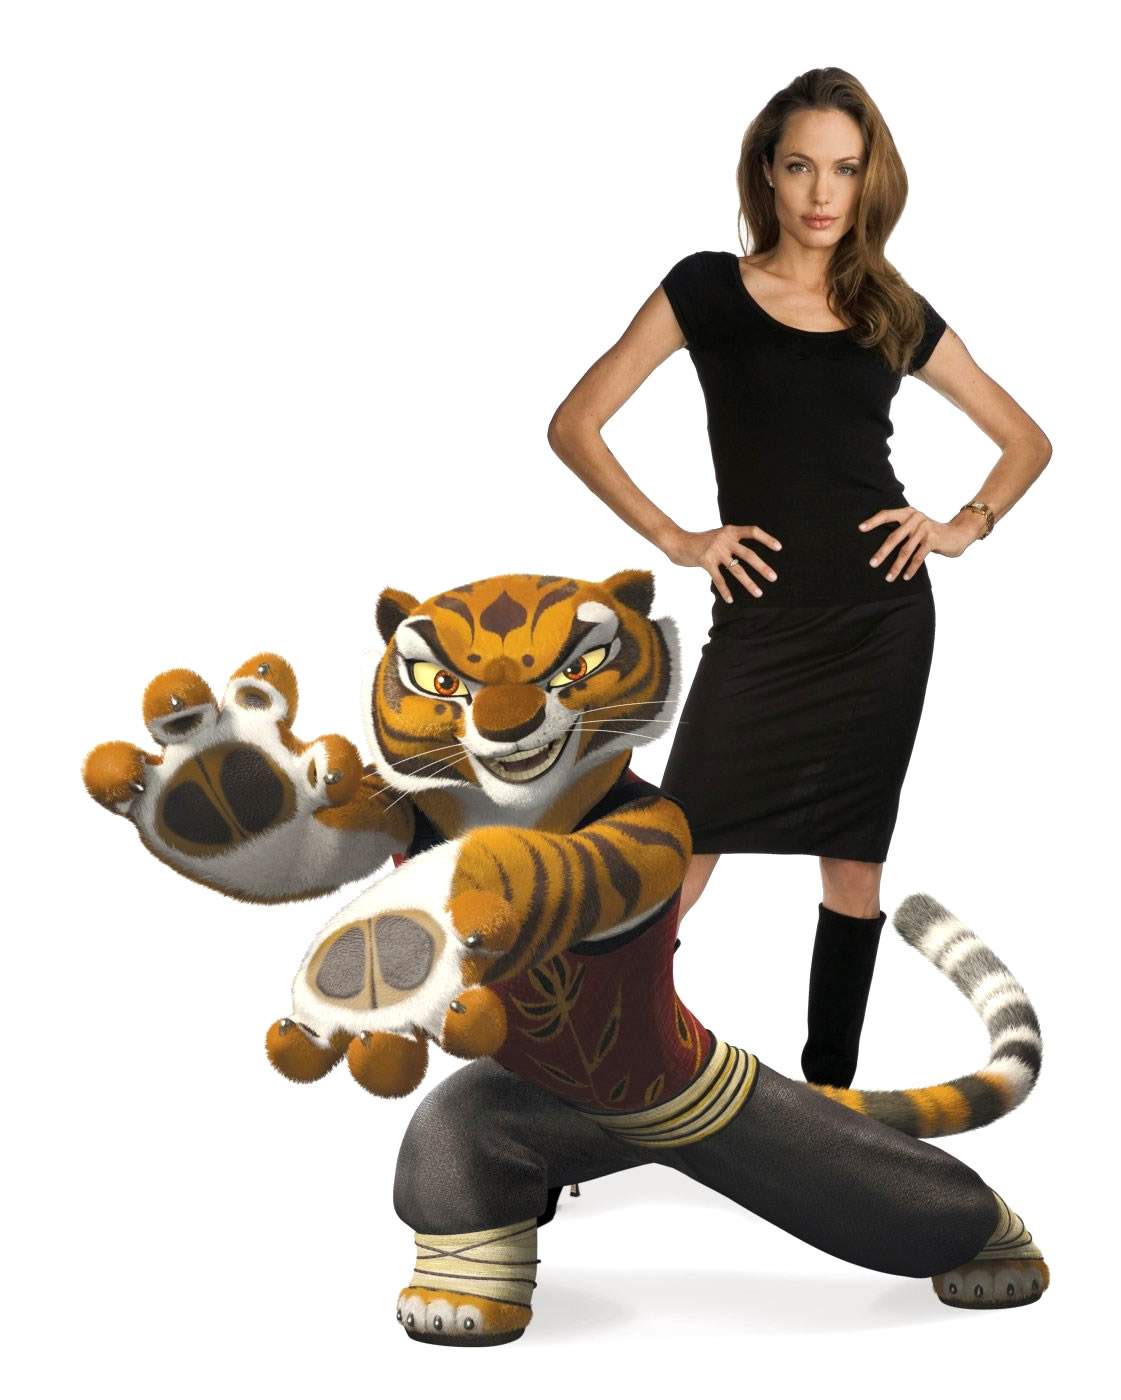 ANGELINA JOLIE voices the bold and strong Tigress, one of the legendary Furious Five in DreamWorks' Kung Fu Panda (2008). Photo by Patrick Ecclesine.